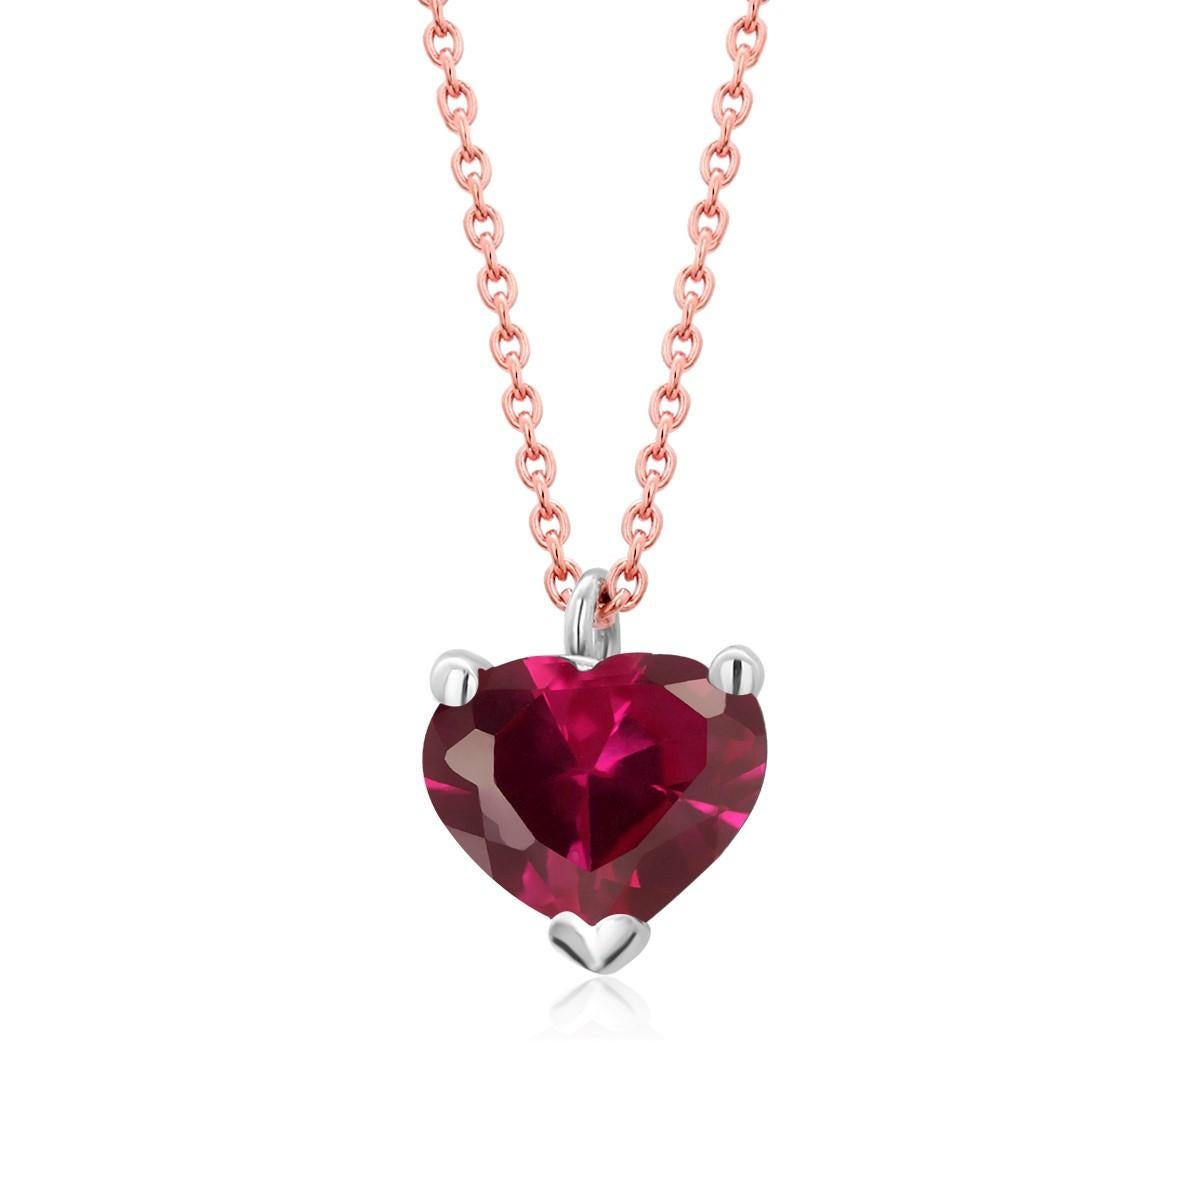 Fourteen karats white and rose gold trending layered necklace pendant with hanging heart shape red ruby
Heart shape ruby weighing 1.00 carat
Chain measuring 16 inches long
Ruby measuring 6 millimeters. 0.25 inch
Cable chain necklace with spring